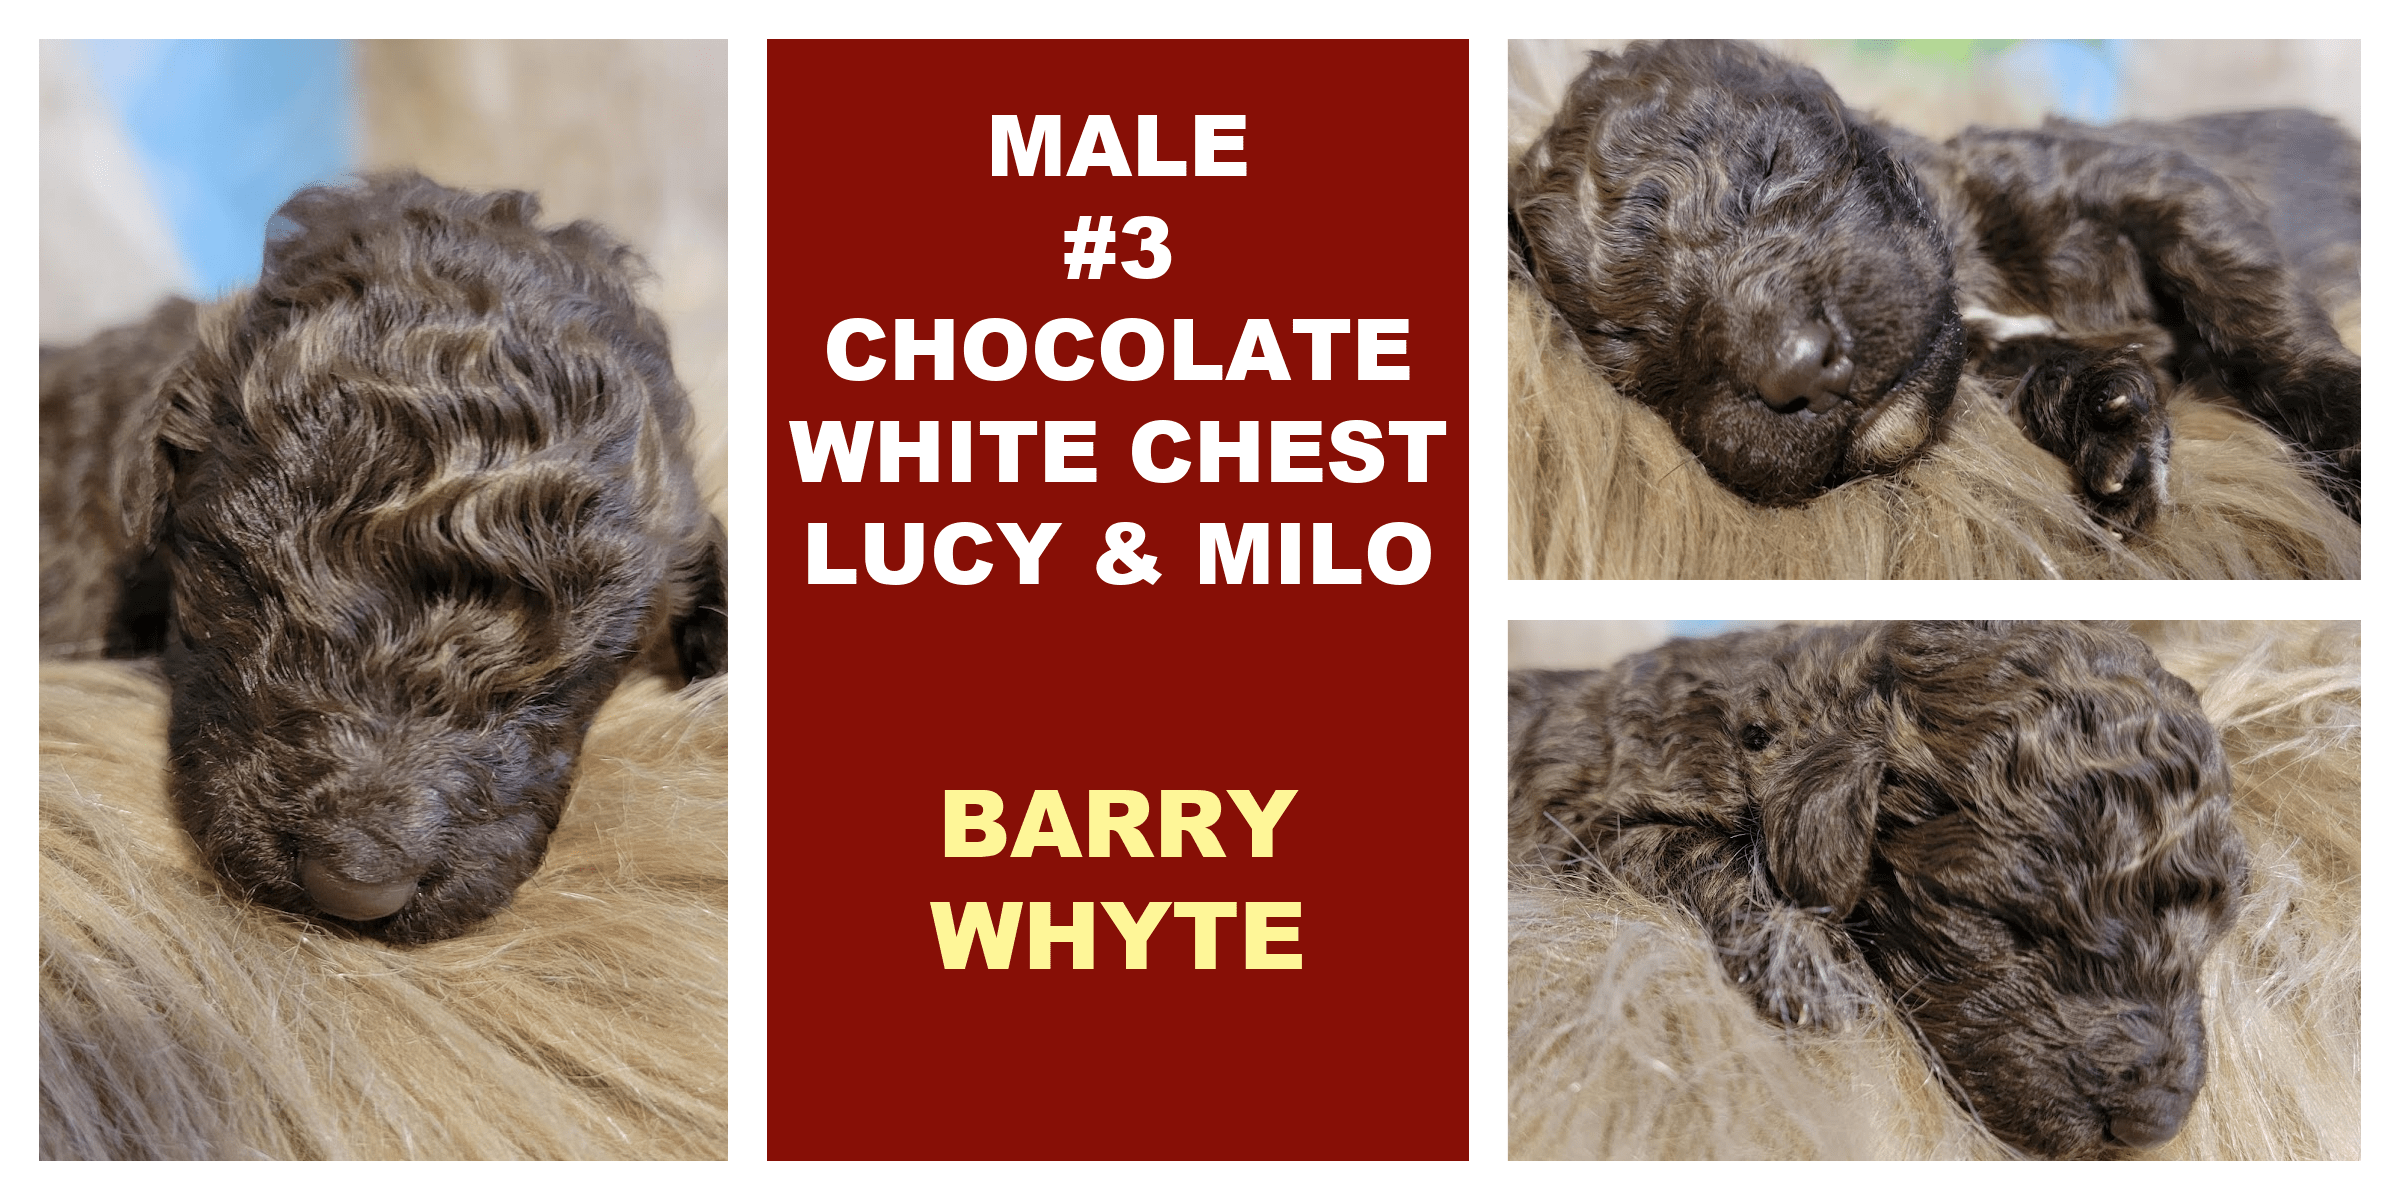 MALE 3 CHOCOLATE WHITE CHEST LUCY MILO